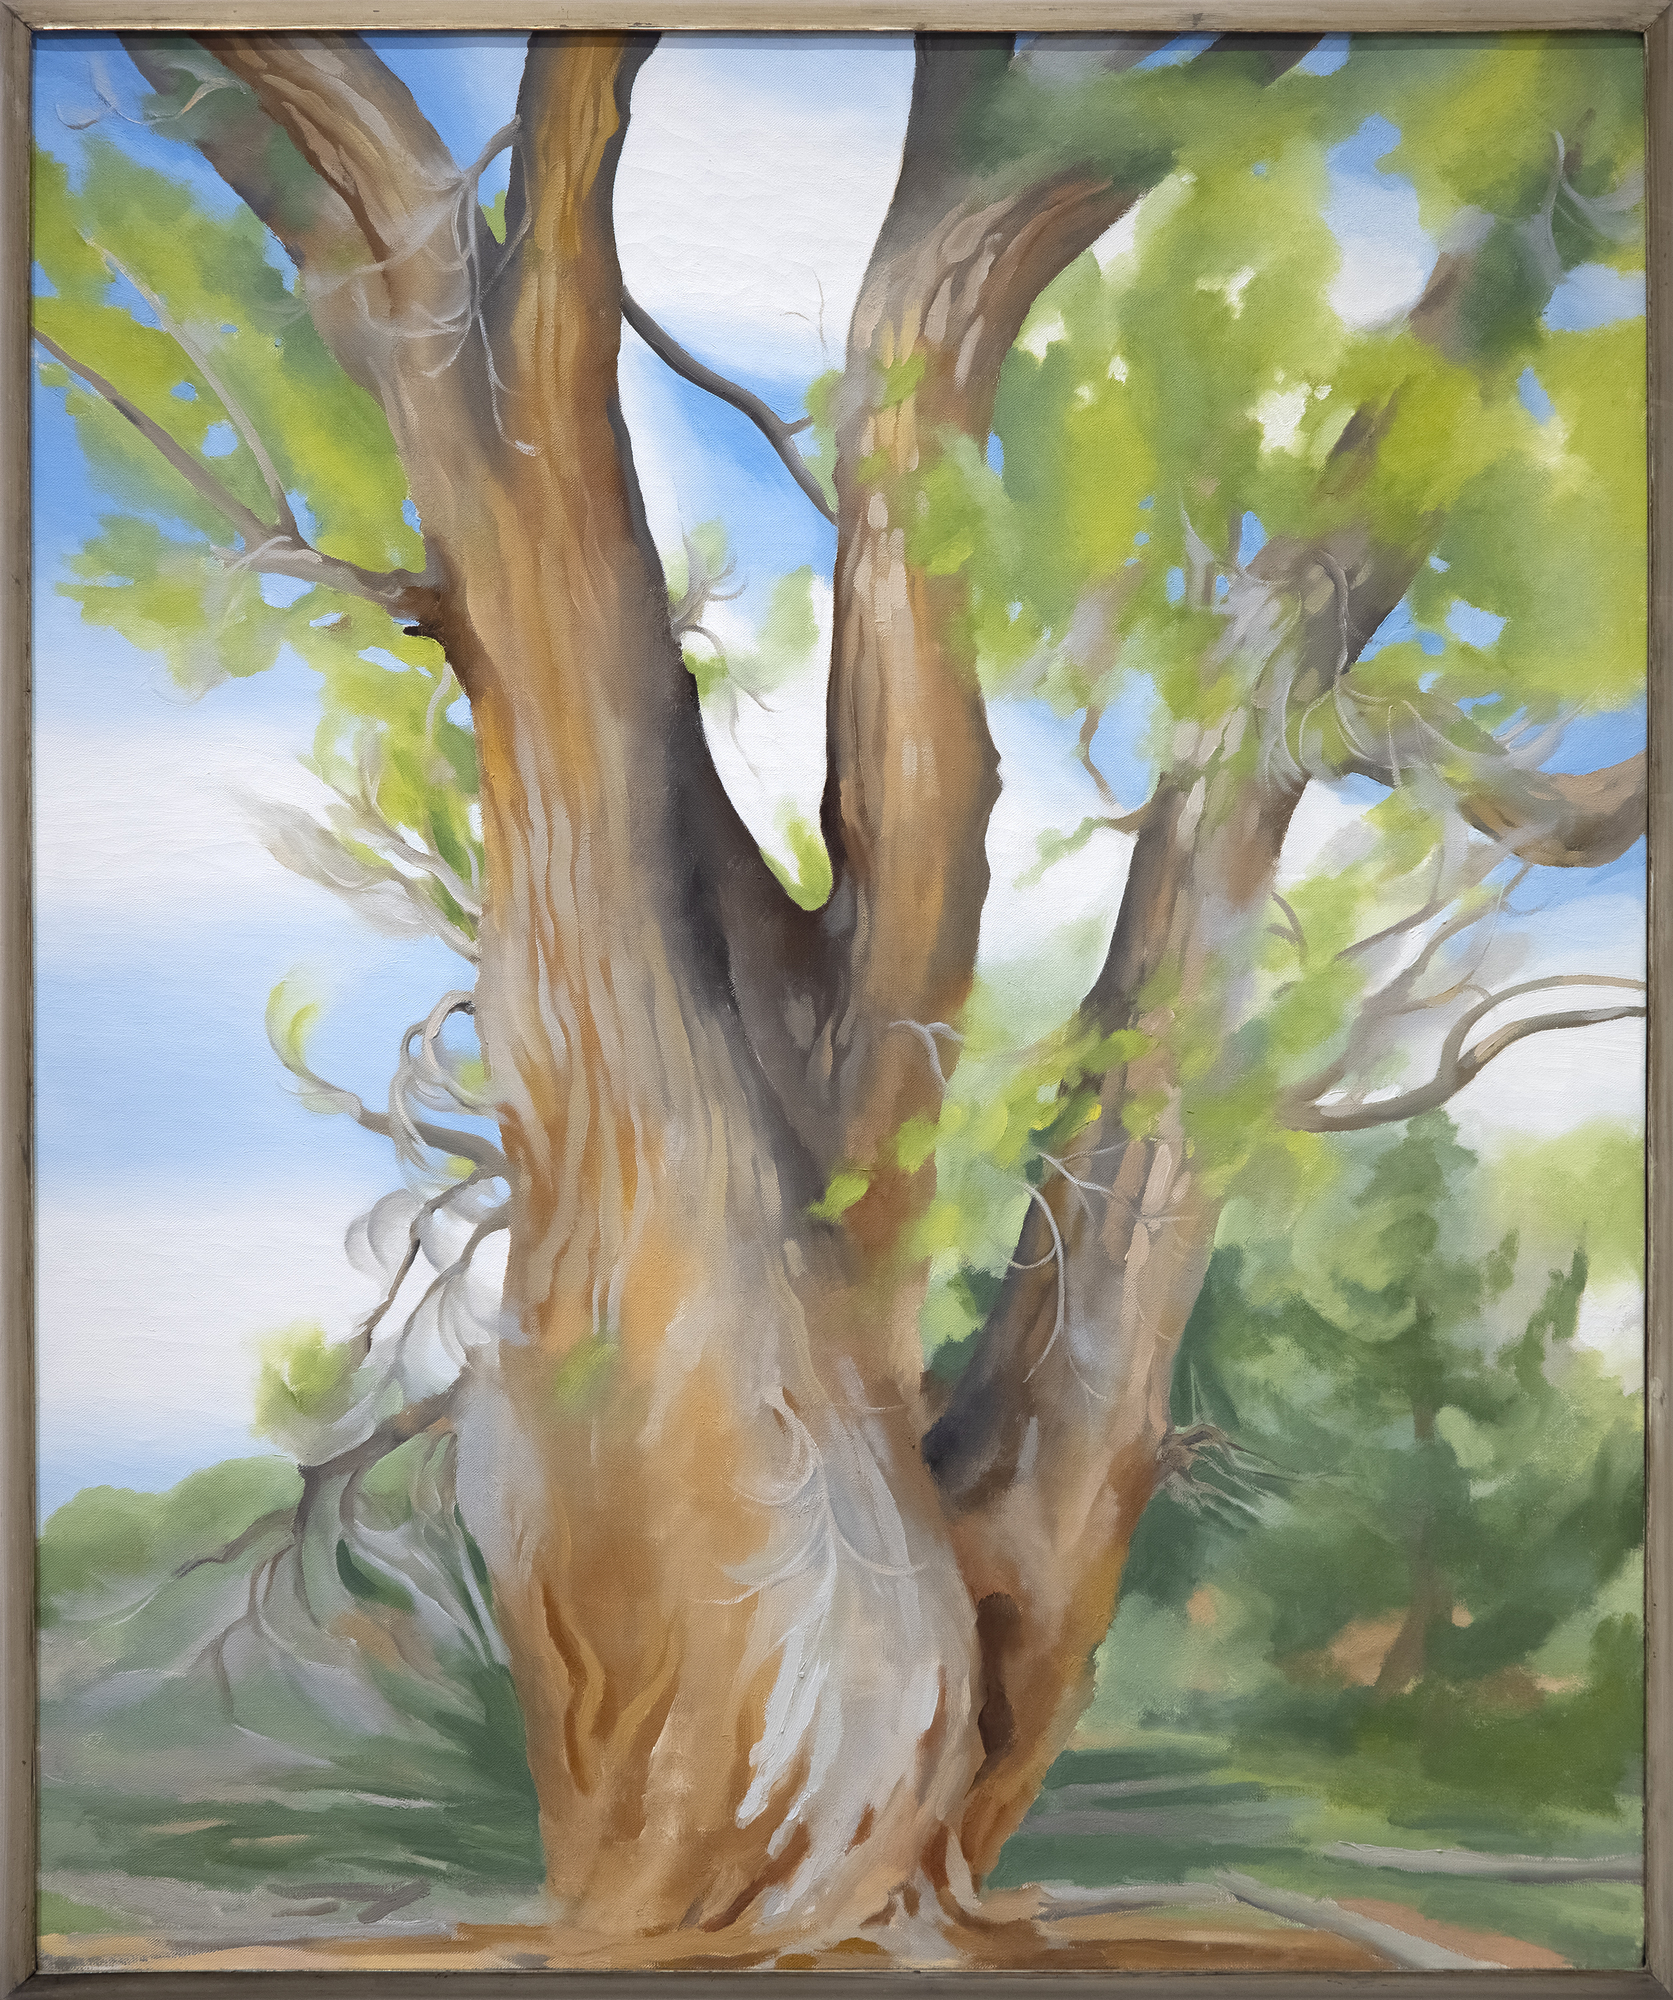 Cottonwood Tree (Near Abiquiu), New Mexico (1943) by celebrated American artist Georgia O’Keeffe is exemplary of the airier, more naturalistic style that the desert inspired in her. O’Keeffe had great affinity for the distinctive beauty of the Southwest, and made her home there among the spindly trees, dramatic vistas, and bleached animal skulls that she so frequently painted. O’Keeffe took up residence at Ghost Ranch, a dude ranch twelve miles outside of the village of Abiquiú in northern New Mexico and painted this cottonwood tree around there. The softer style befitting this subject is a departure from her bold architectural landscapes and jewel-toned flowers.&lt;br&gt;&lt;br&gt;The cottonwood tree is abstracted into soft patches of verdant greens through which more delineated branches are seen, spiraling in space against pockets of blue sky. The modeling of the trunk and delicate energy in the leaves carry forward past experimentations with the regional trees of the Northeast that had captivated O’Keeffe years earlier: maples, chestnuts, cedars, and poplars, among others. Two dramatic canvases from 1924, Autumn Trees, The Maple and The Chestnut Grey, are early instances of lyrical and resolute centrality, respectively. As seen in these early tree paintings, O’Keeffe exaggerated the sensibility of her subject with color and form.&lt;br&gt;&lt;br&gt;In her 1974 book, O’Keeffe explained: “The meaning of a word— to me— is not as exact as the meaning of a color. Color and shapes make a more definite statement than words.” Her exacting, expressive color intrigued. The Precisionist painter Charles Demuth described how, in O’Keeffe’s work, “each color almost regains the fun it must have felt within itself on forming the first rainbow” (As quoted in C. Eldridge, Georgia O’Keeffe, New York, 1991, p. 33). As well, congruities between forms knit together her oeuvre. Subjects like hills and petals undulate alike, while antlers, trees, and tributaries correspond in their branching morphology.&lt;br&gt;&lt;br&gt;The sinewy contours and gradated hues characteristic of O’Keeffe find an incredible range across decades of her tree paintings. In New Mexico, O’Keeffe returned to the cottonwood motif many times, and the seasonality of this desert tree inspired many forms. The vernal thrill of new growth was channeled into spiraling compositions like Spring Tree No.1 (1945). Then, cottonwood trees turned a vivid autumnal yellow provided a breathtaking compliment to the blue backdrop of Mount Pedernal. The ossified curves of Dead Cottonweed Tree (1943) contain dramatic pools of light and dark, providing a foil to the warm, breathing quality of this painting, Cottonwood Tree (Near Abiquiu). The aural quality of this feathered cottonwood compels a feeling guided by O’Keeffe’s use of form of color.